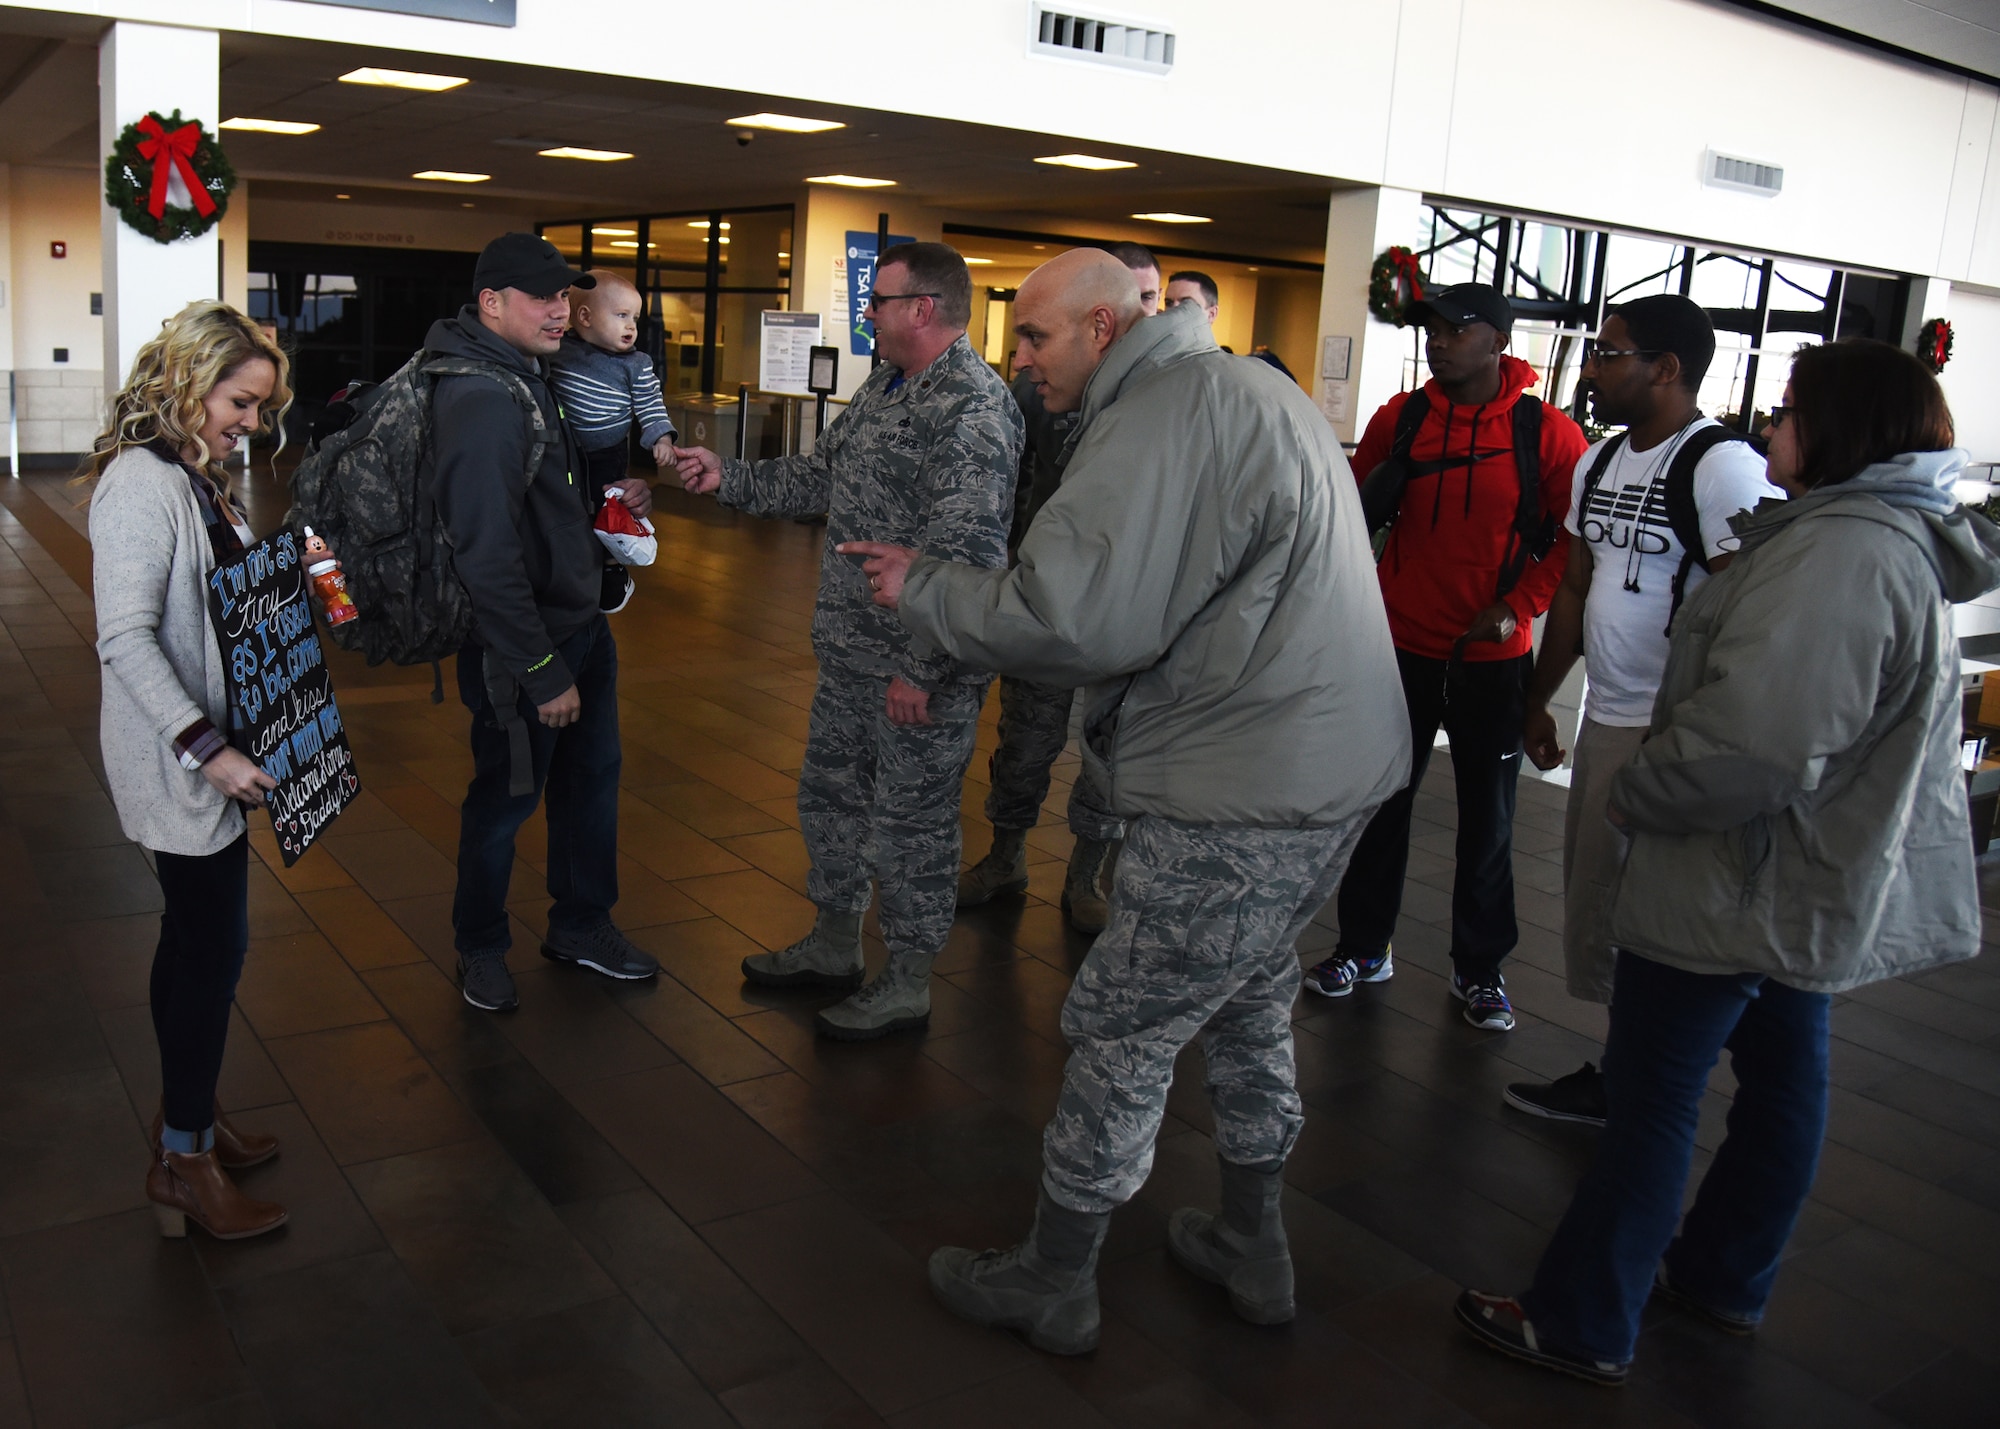 Leadership from the 69th Maintenance Squadron welcome home Airmen from their squadron Dec. 9, 2016, in Grand Forks, N.D. Airmen with the 69th MXS deploy regularly and work to ensure the mission of the 69th Reconnaissance Group is completed at home and abroad. (U.S. Air Force photo by Senior Airman Ryan Sparks)